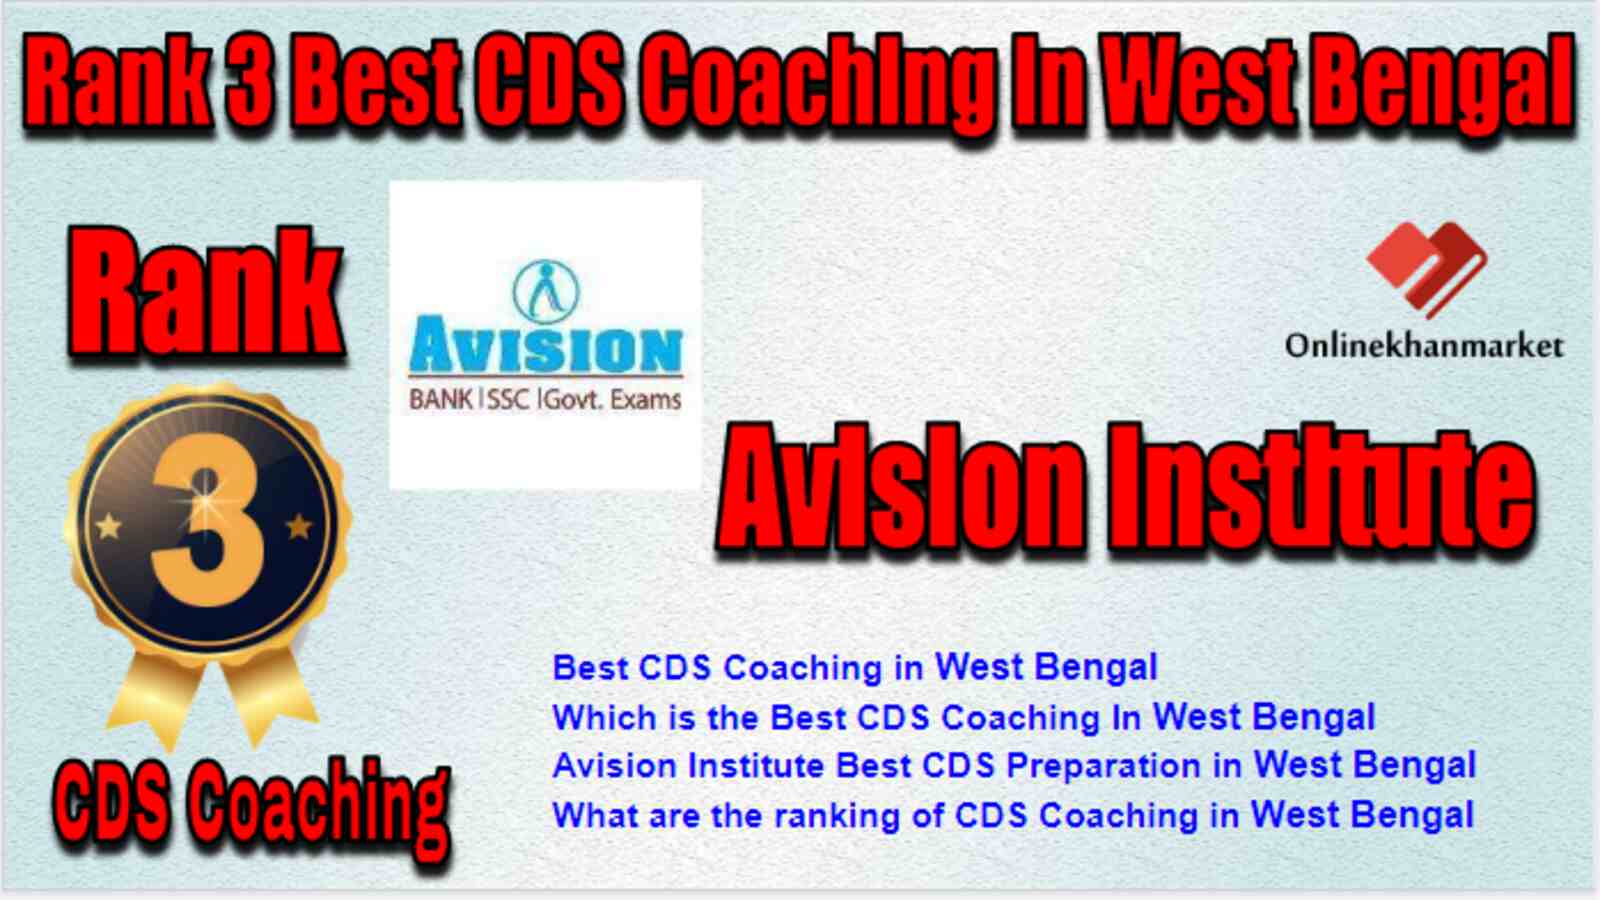 Rank 3 Best CDS Coaching in West Bengal